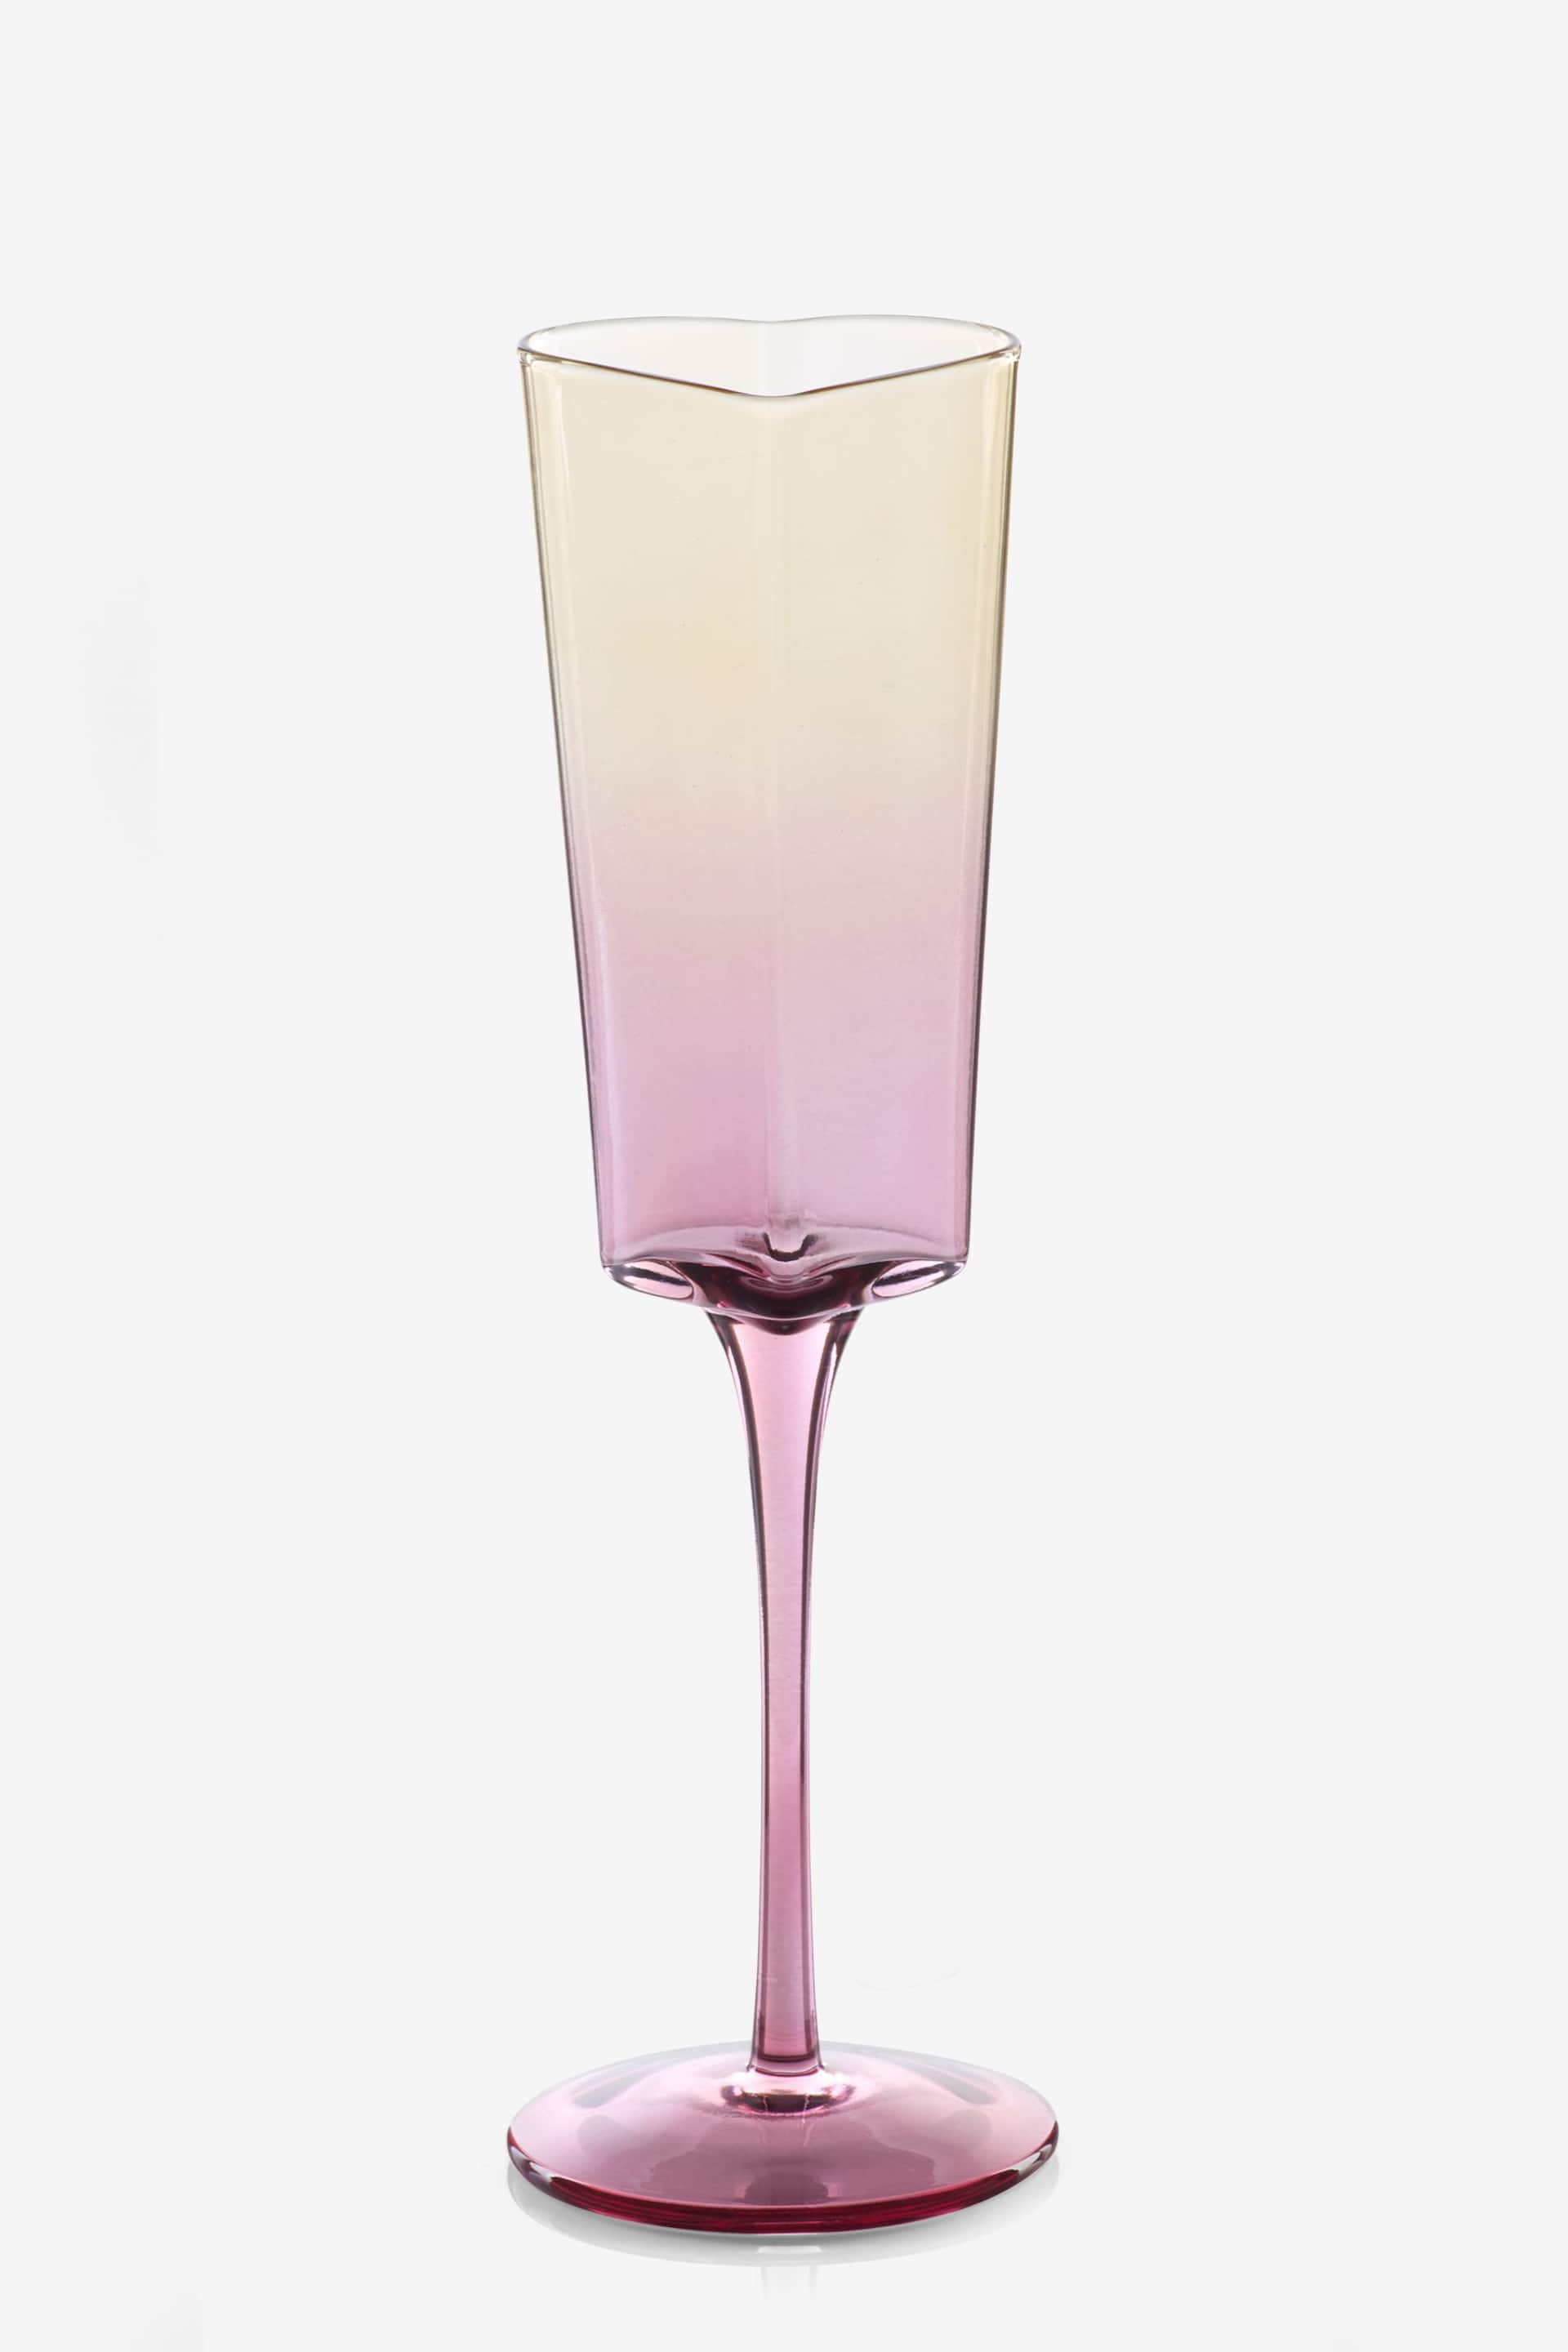 Set of 2 Purple Ombre Heart Champagne Flutes - Image 5 of 5